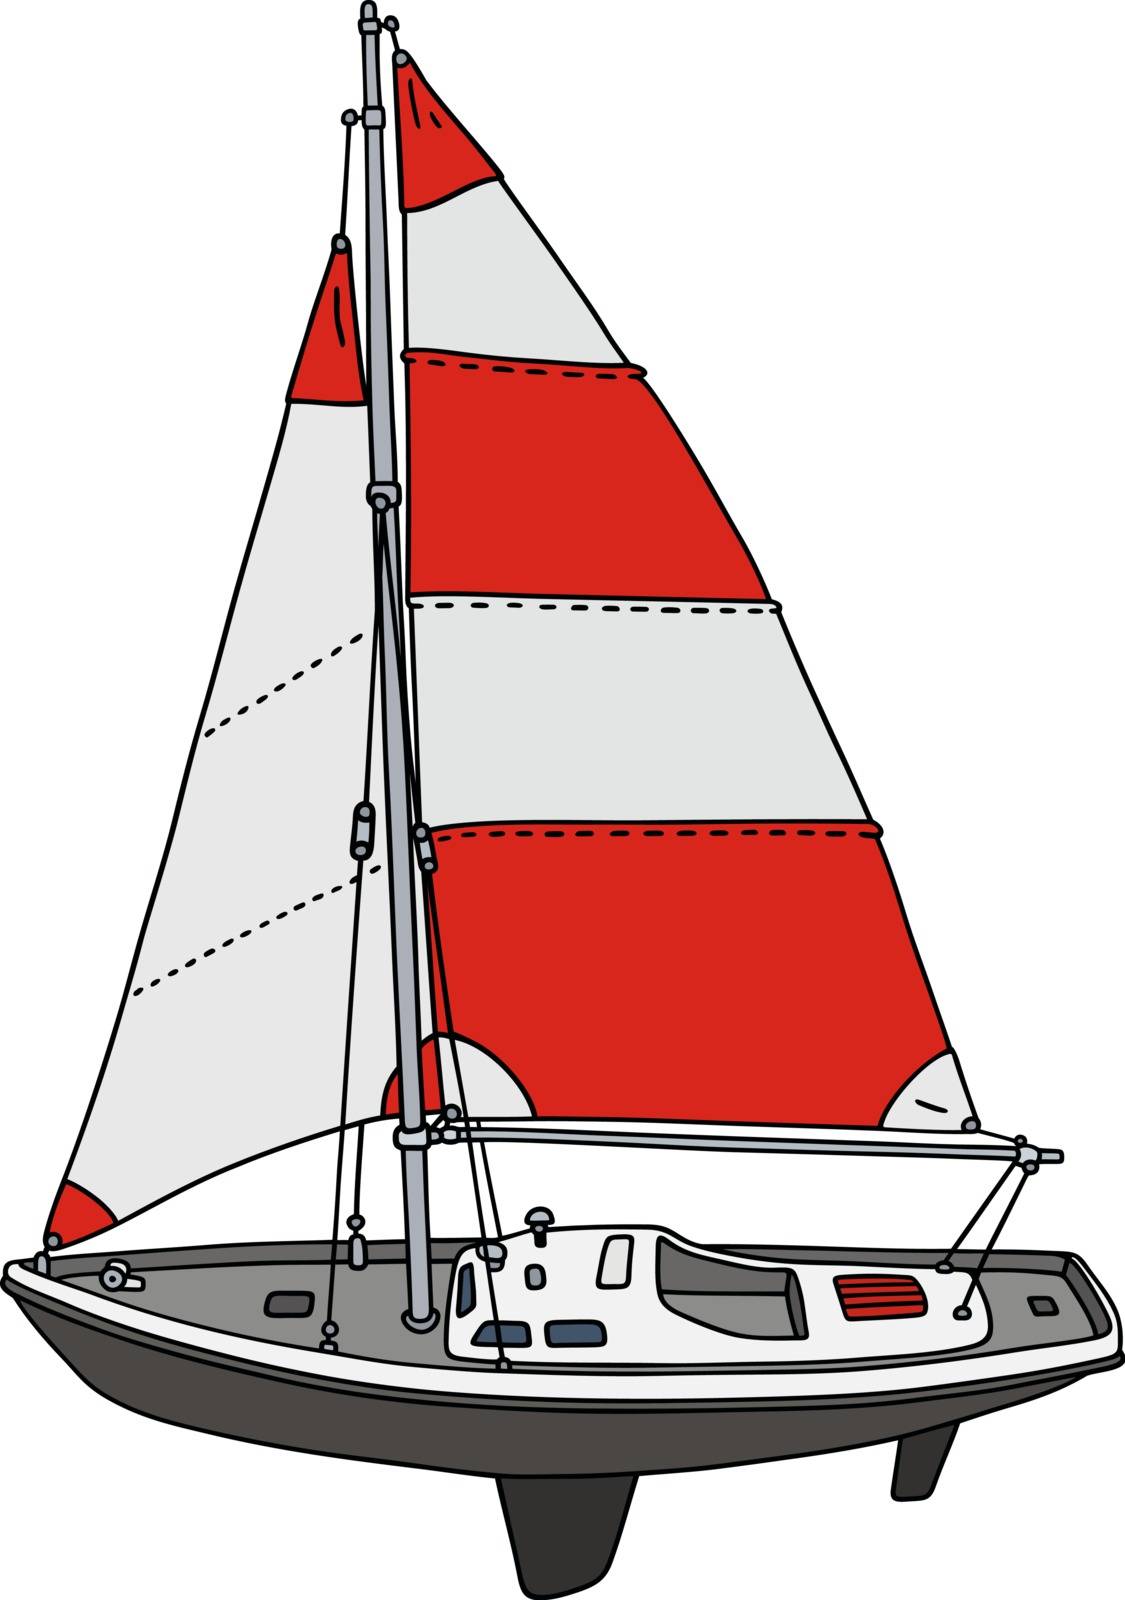 Hand drawing of a sailing yacht - not a real model